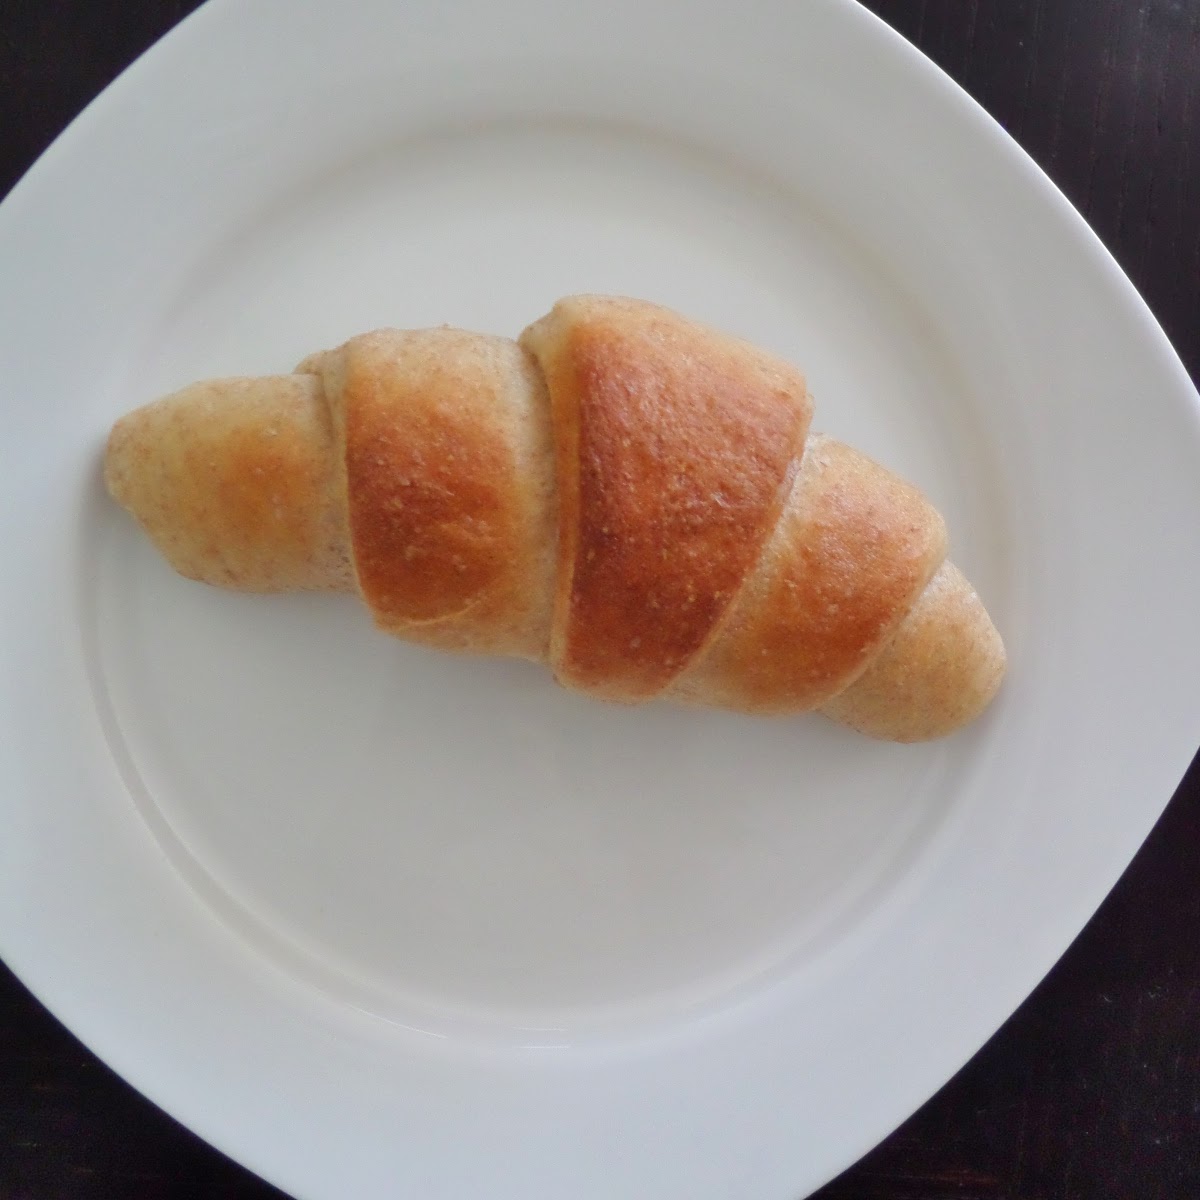 Easy Crescent Rolls:  Soft, yeasty, buttery rolls rolled into crescent shapes.  They make great dinner rolls, sandwich rolls, or snacks.